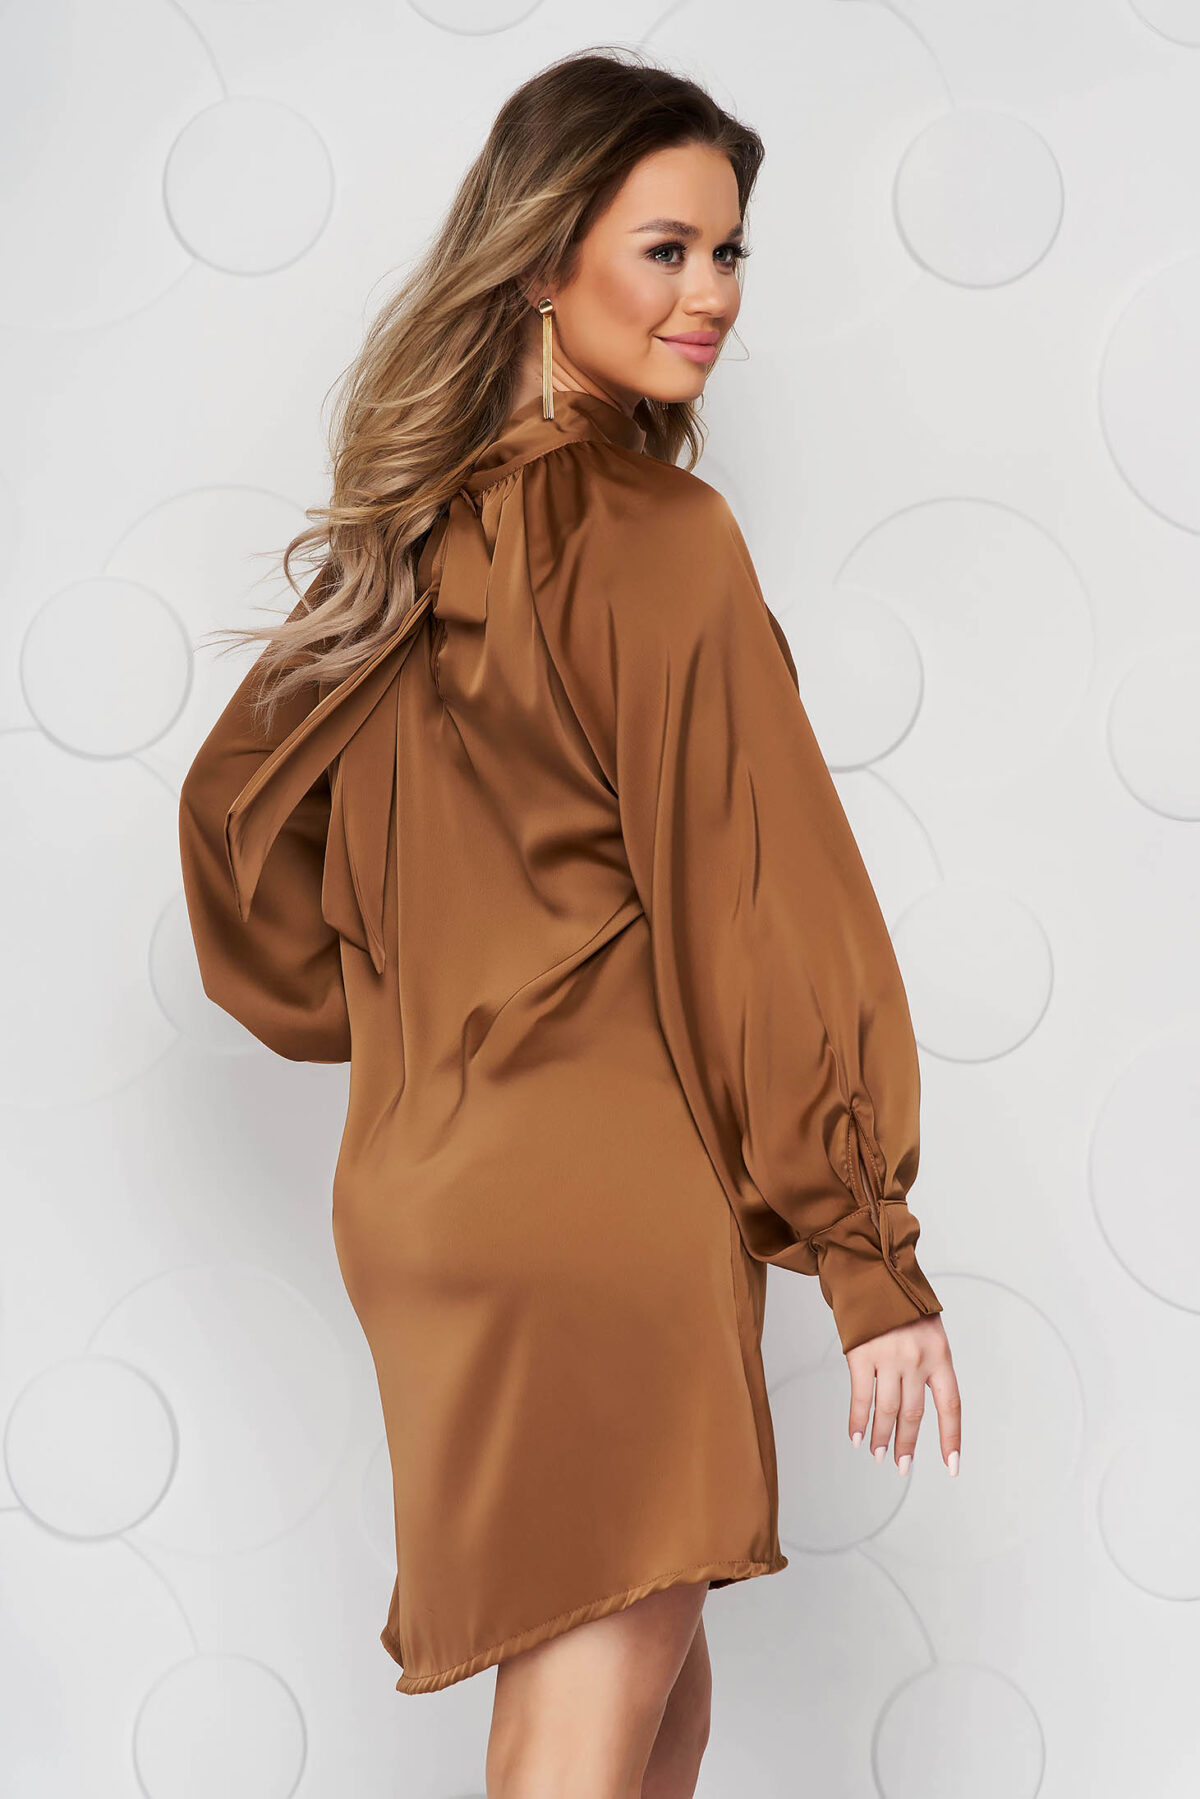 Brown Dress From Satin With Puffed Sleeves Loose Fit Bow Accessory